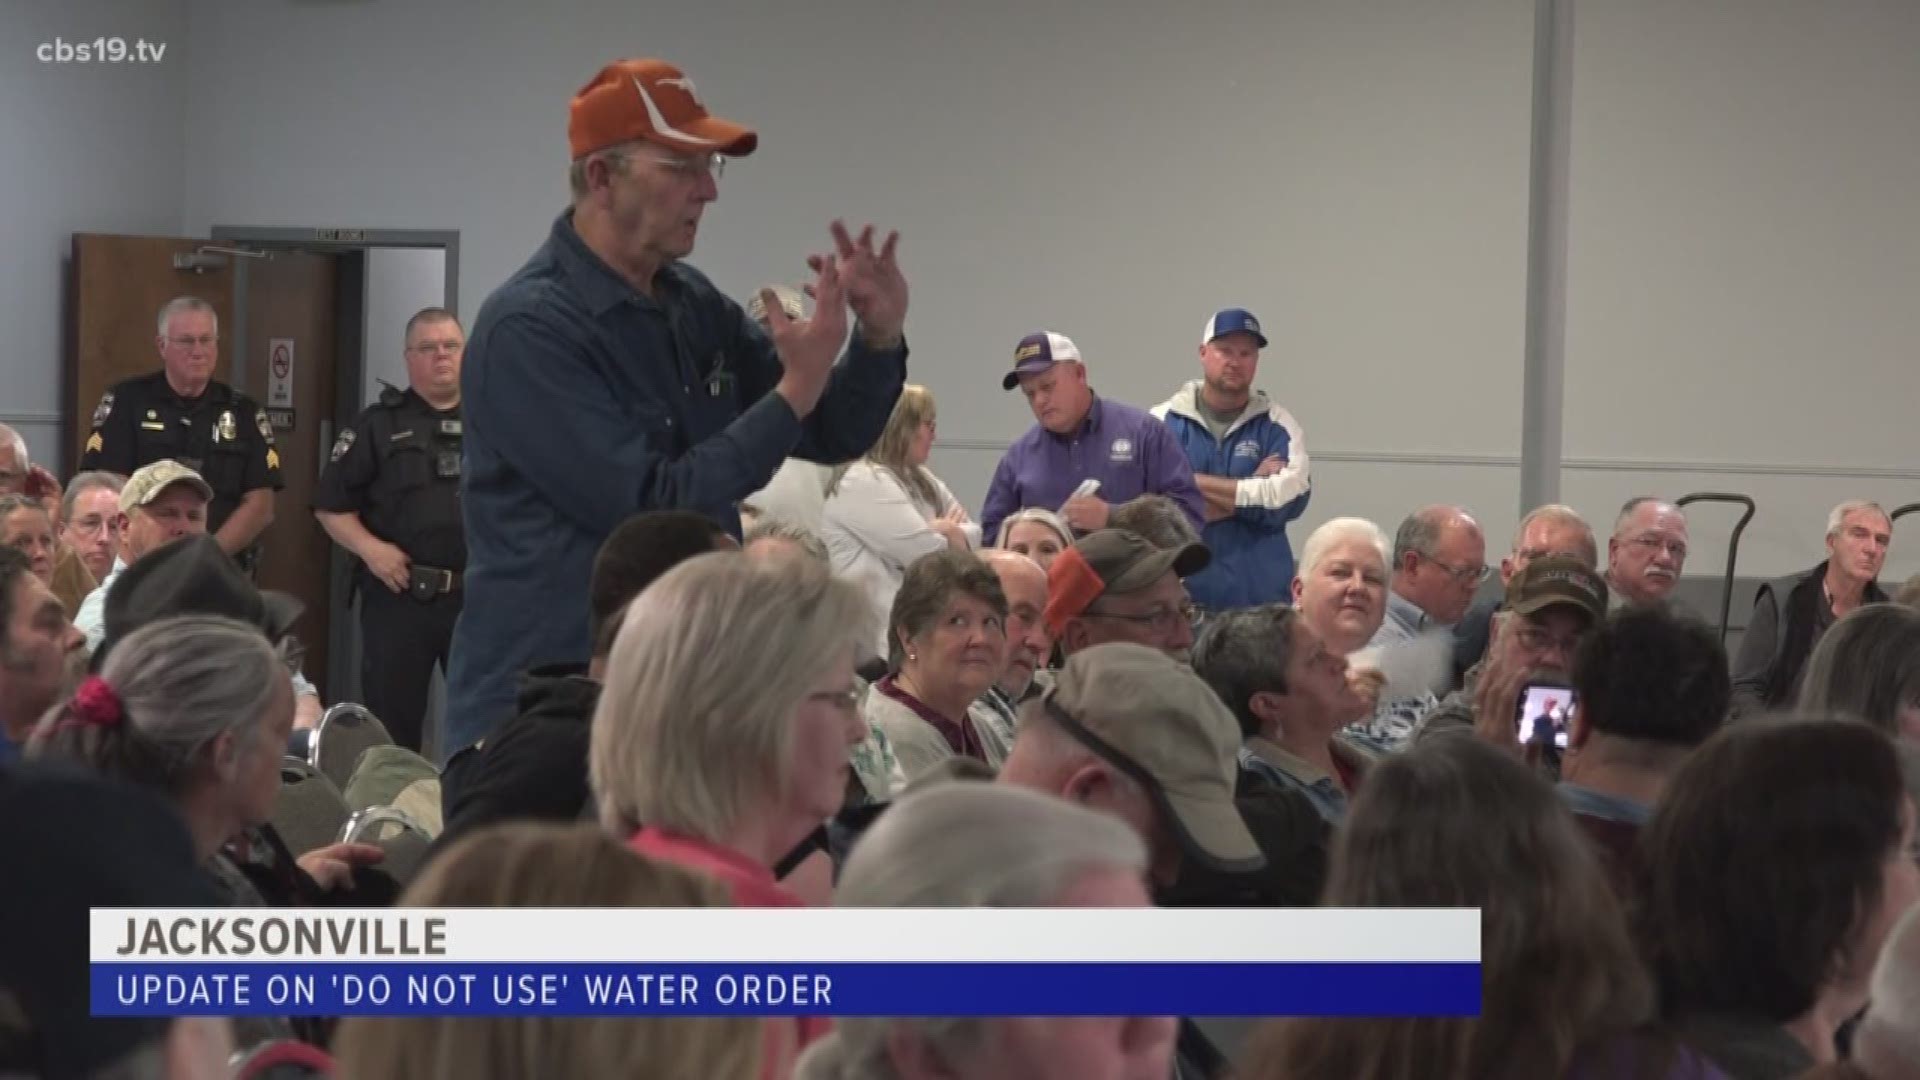 Representatives from Jacksonville took tough questions from residents about the 'Do Not Use' water order affecting the city.